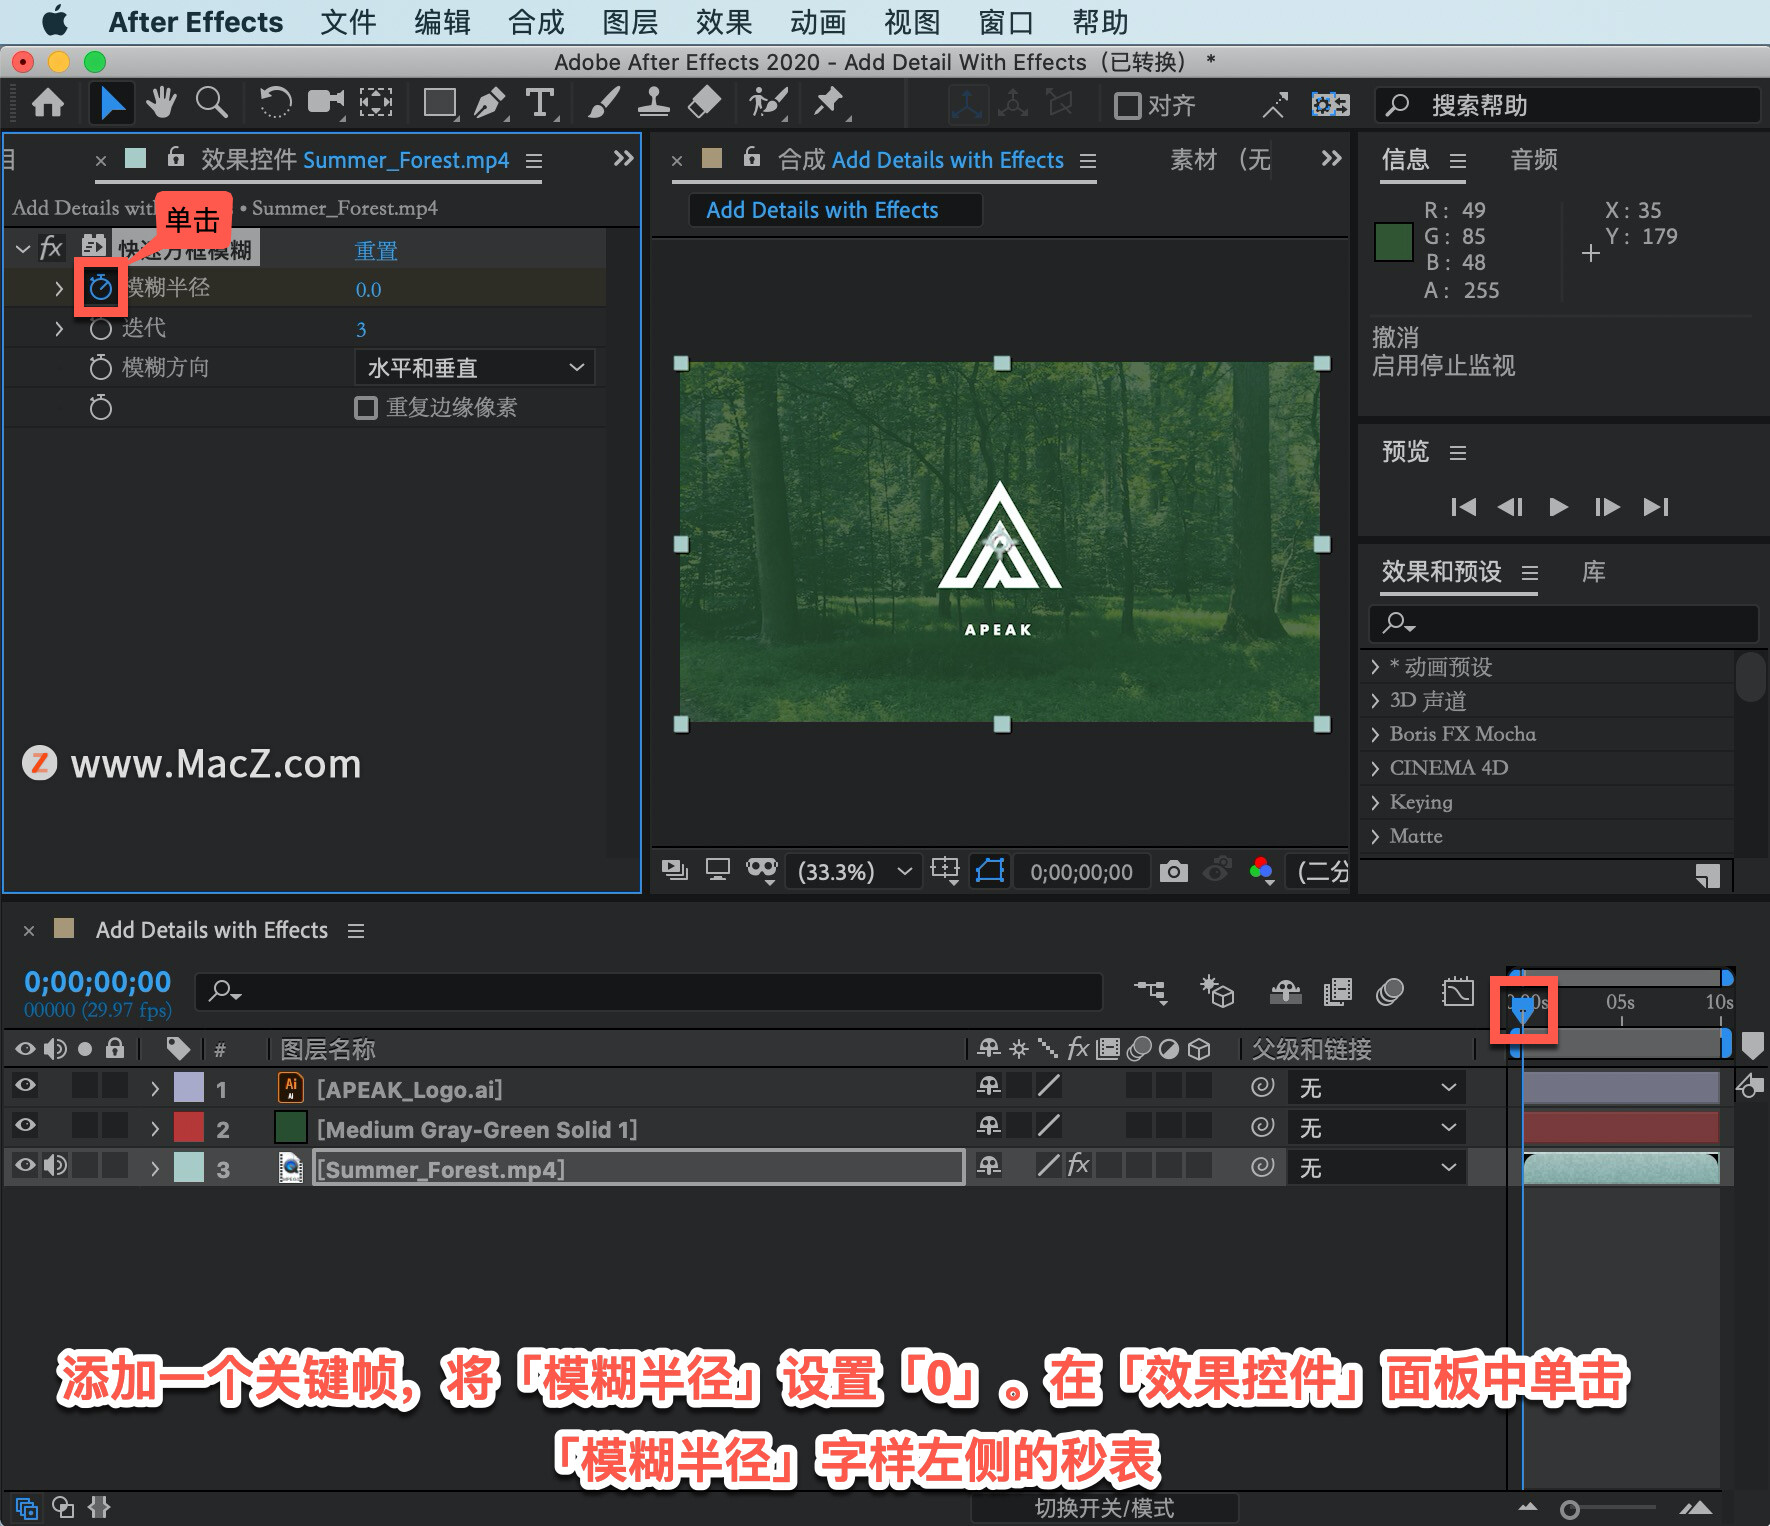 After Effects 教程「11」，如何在 After Effects 中应用效果？